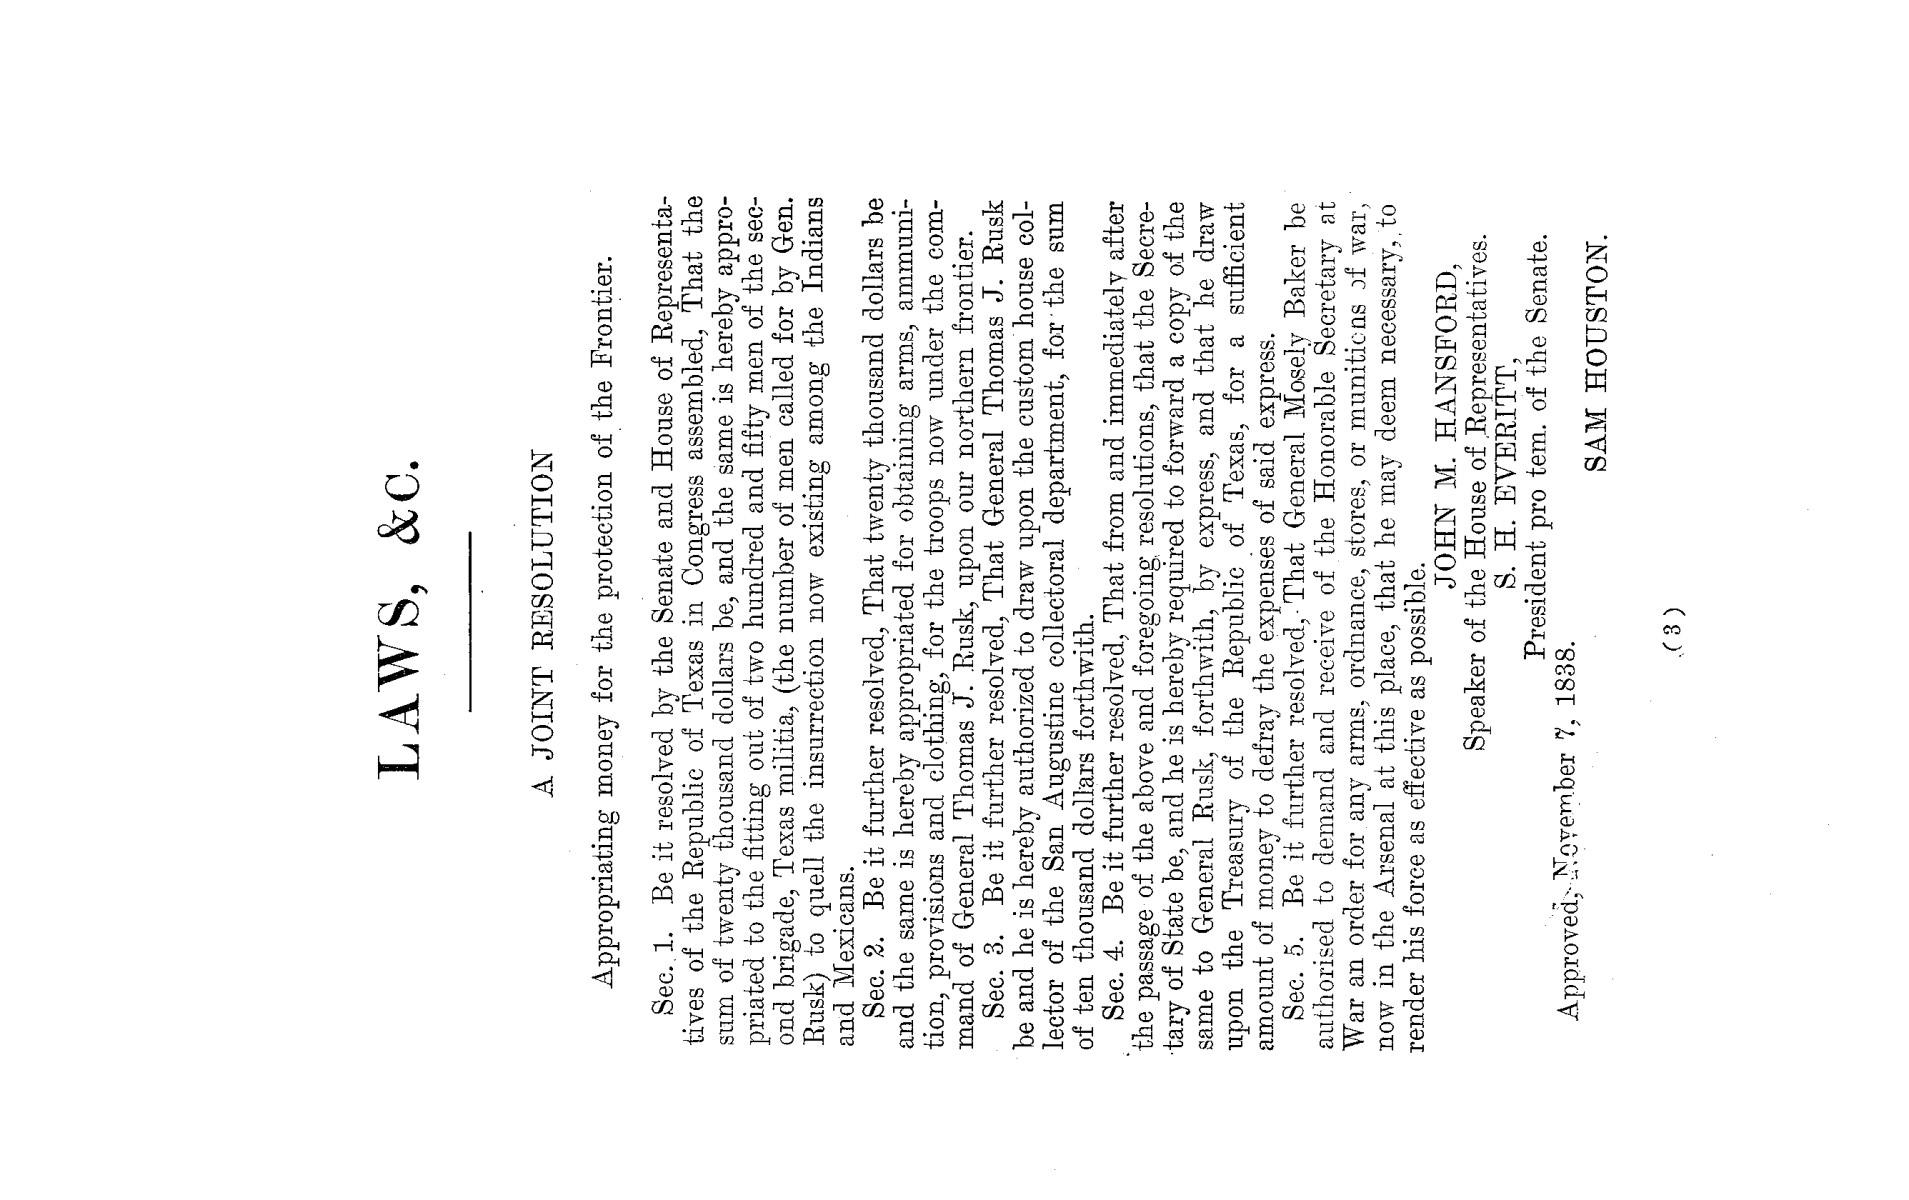 The Laws of Texas, 1822-1897 Volume 2
                                                
                                                    3
                                                